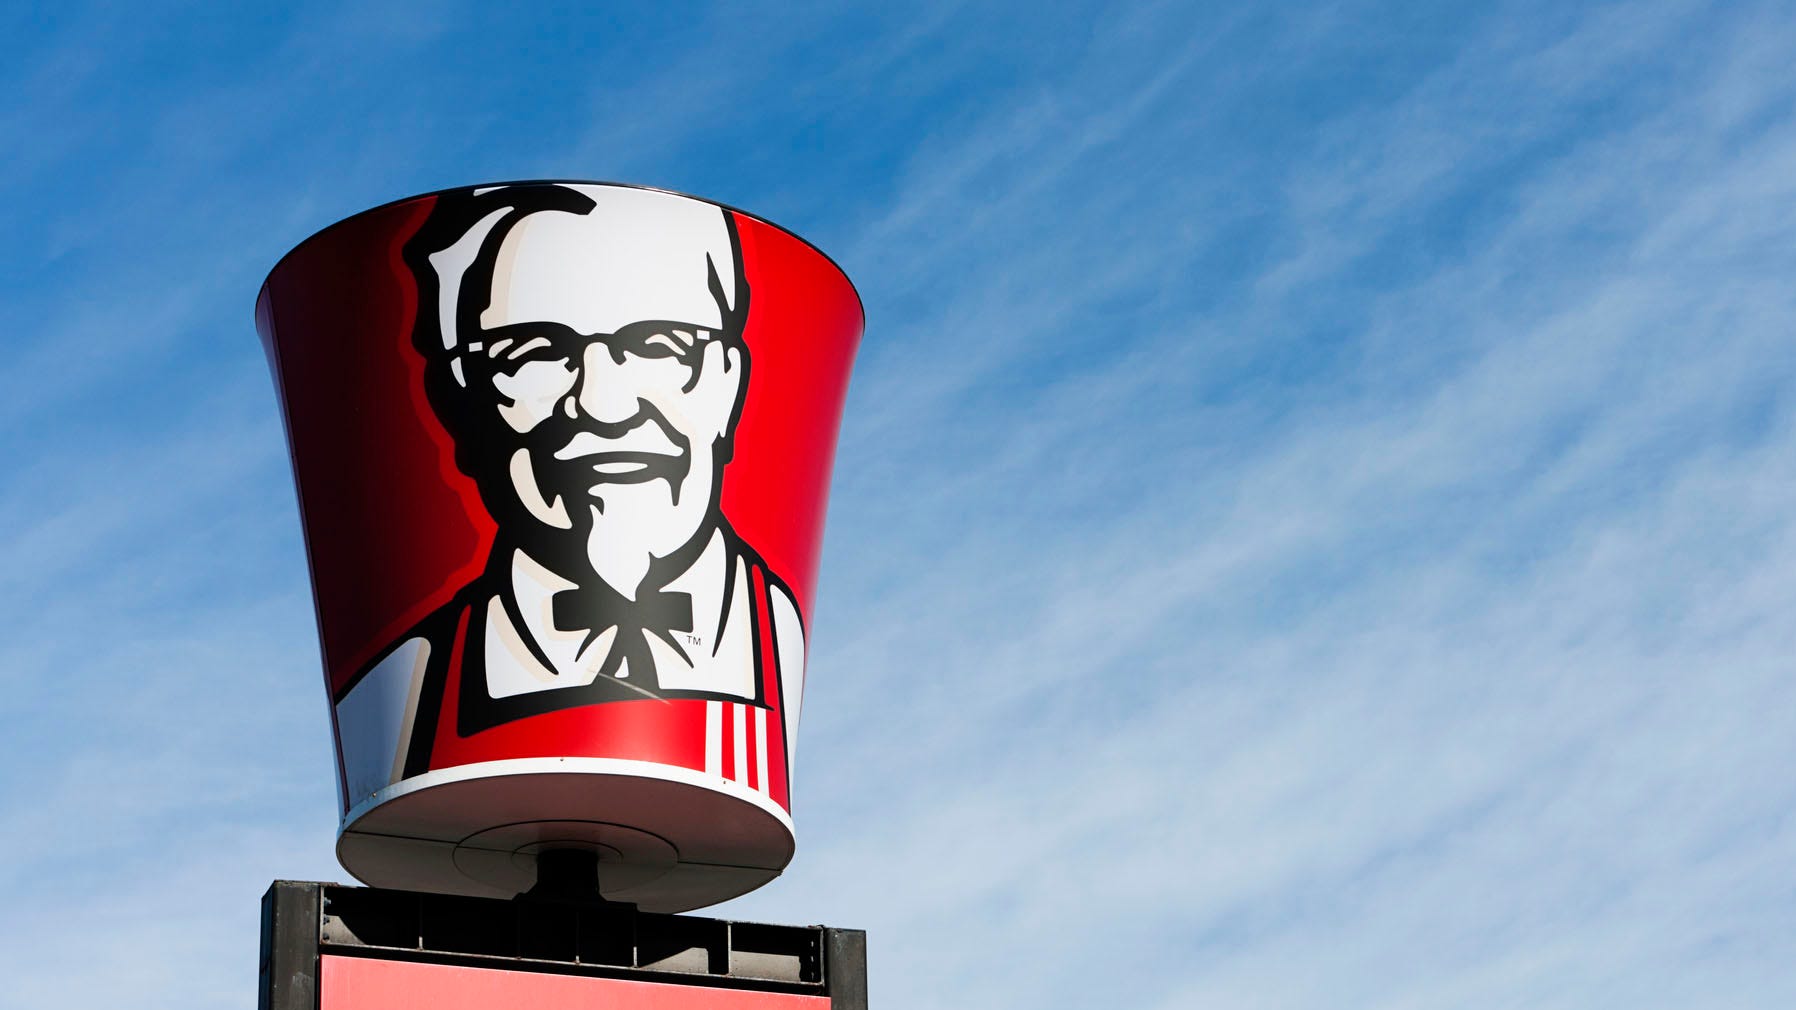 KFC reveals details for the game ‘console’ that heats chicken while users play